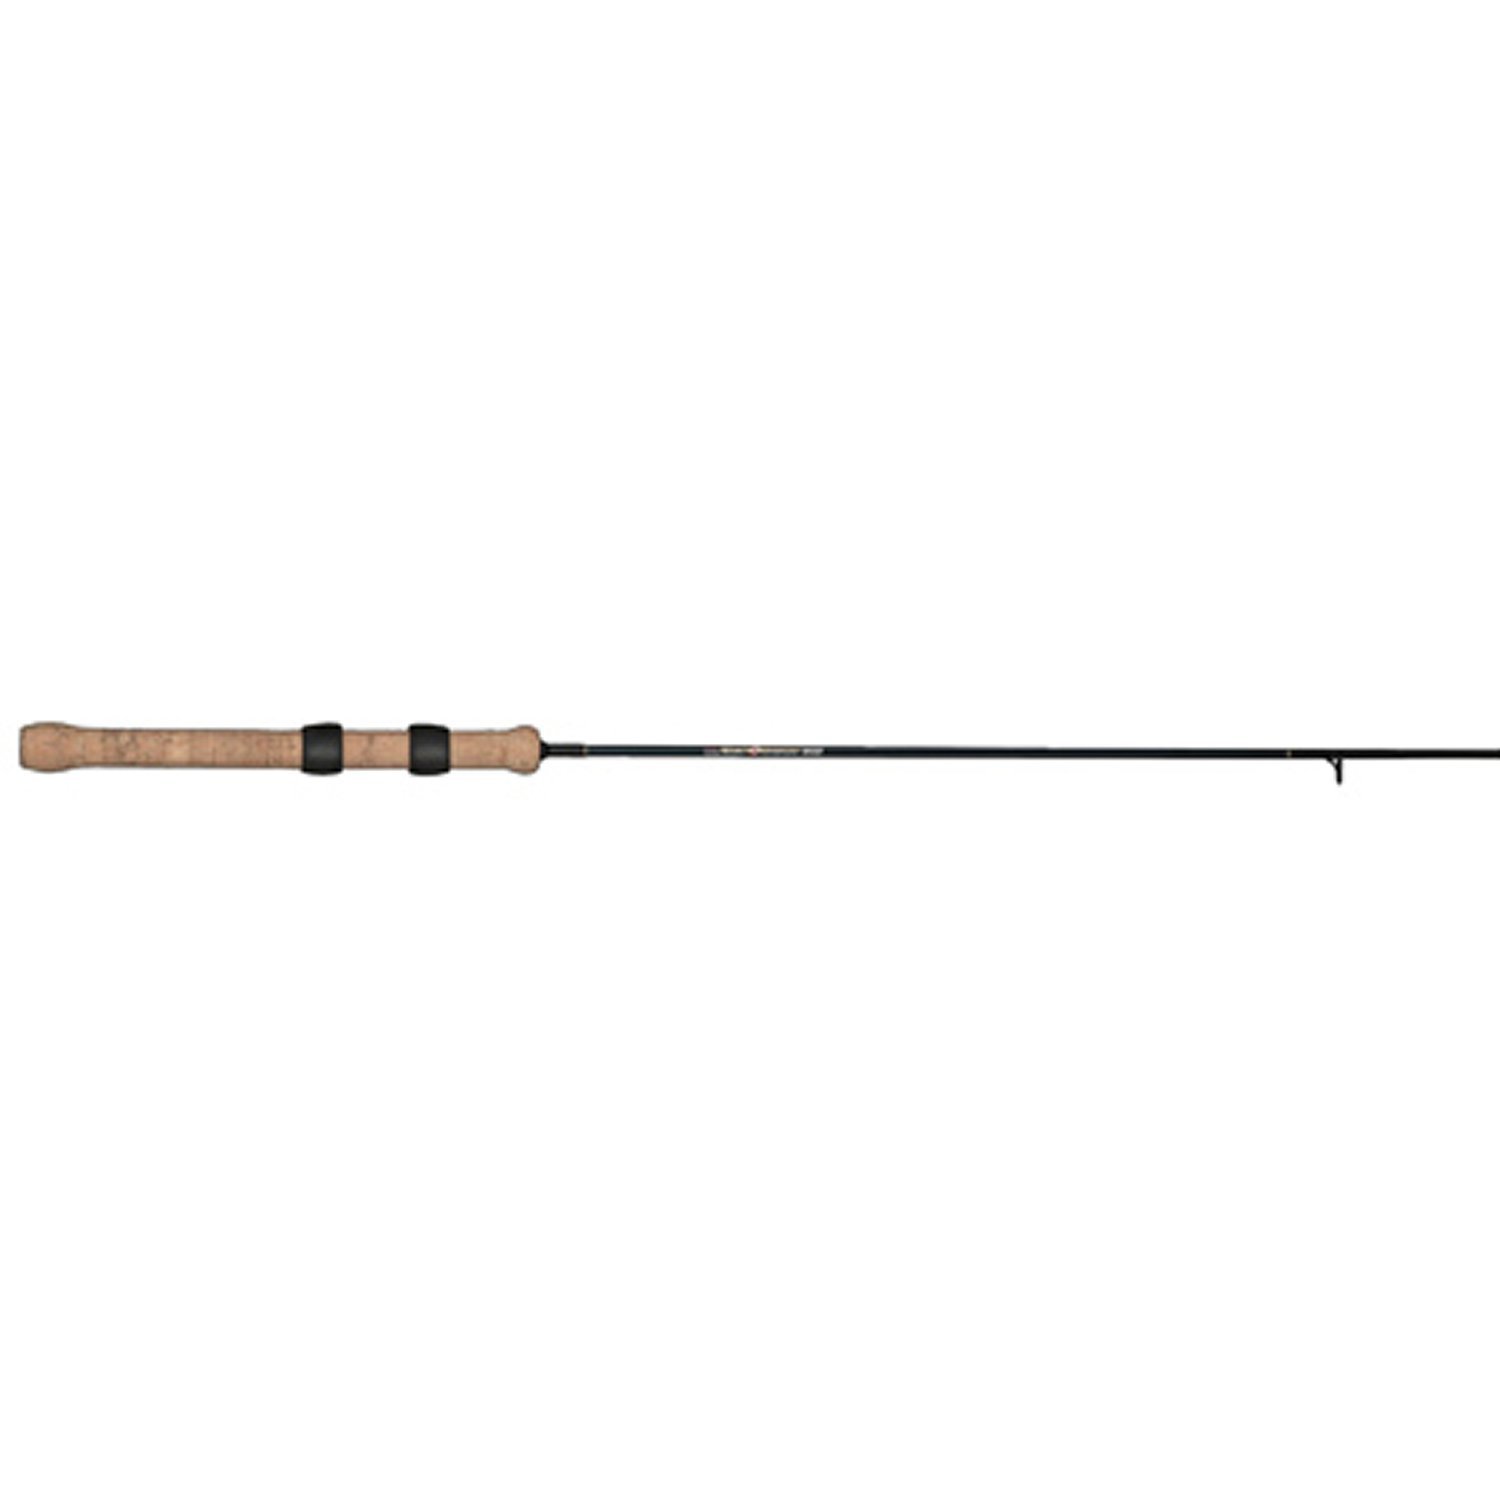 BNM Fishing Sharp Shooter Series Spinning Rod , Up to $4.30 Off